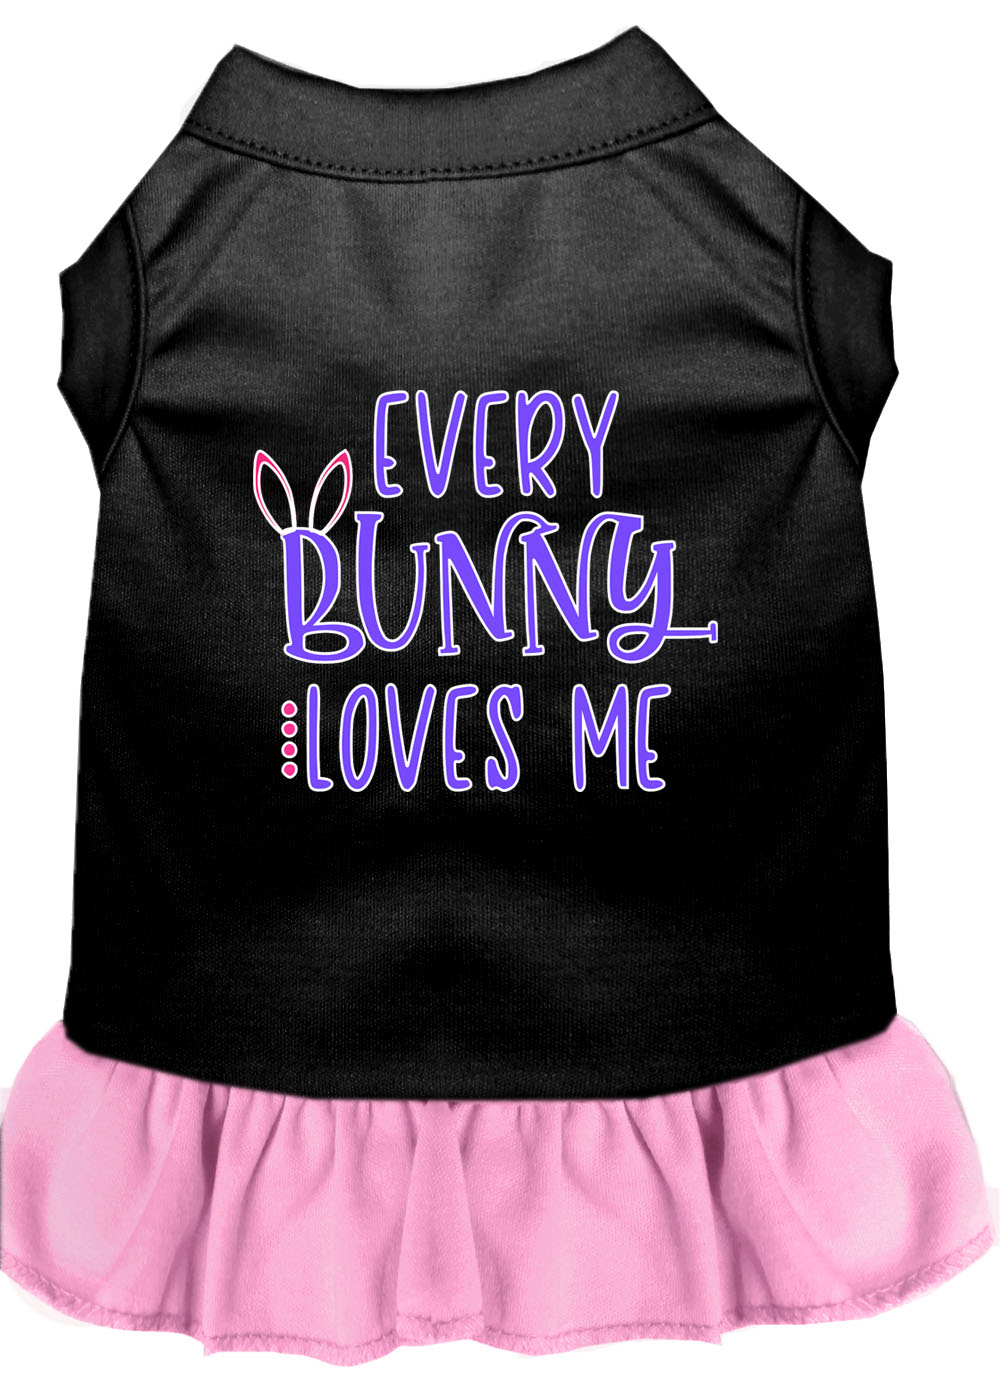 Every Bunny Loves me Screen Print Dog Dress Black with Light Pink Med